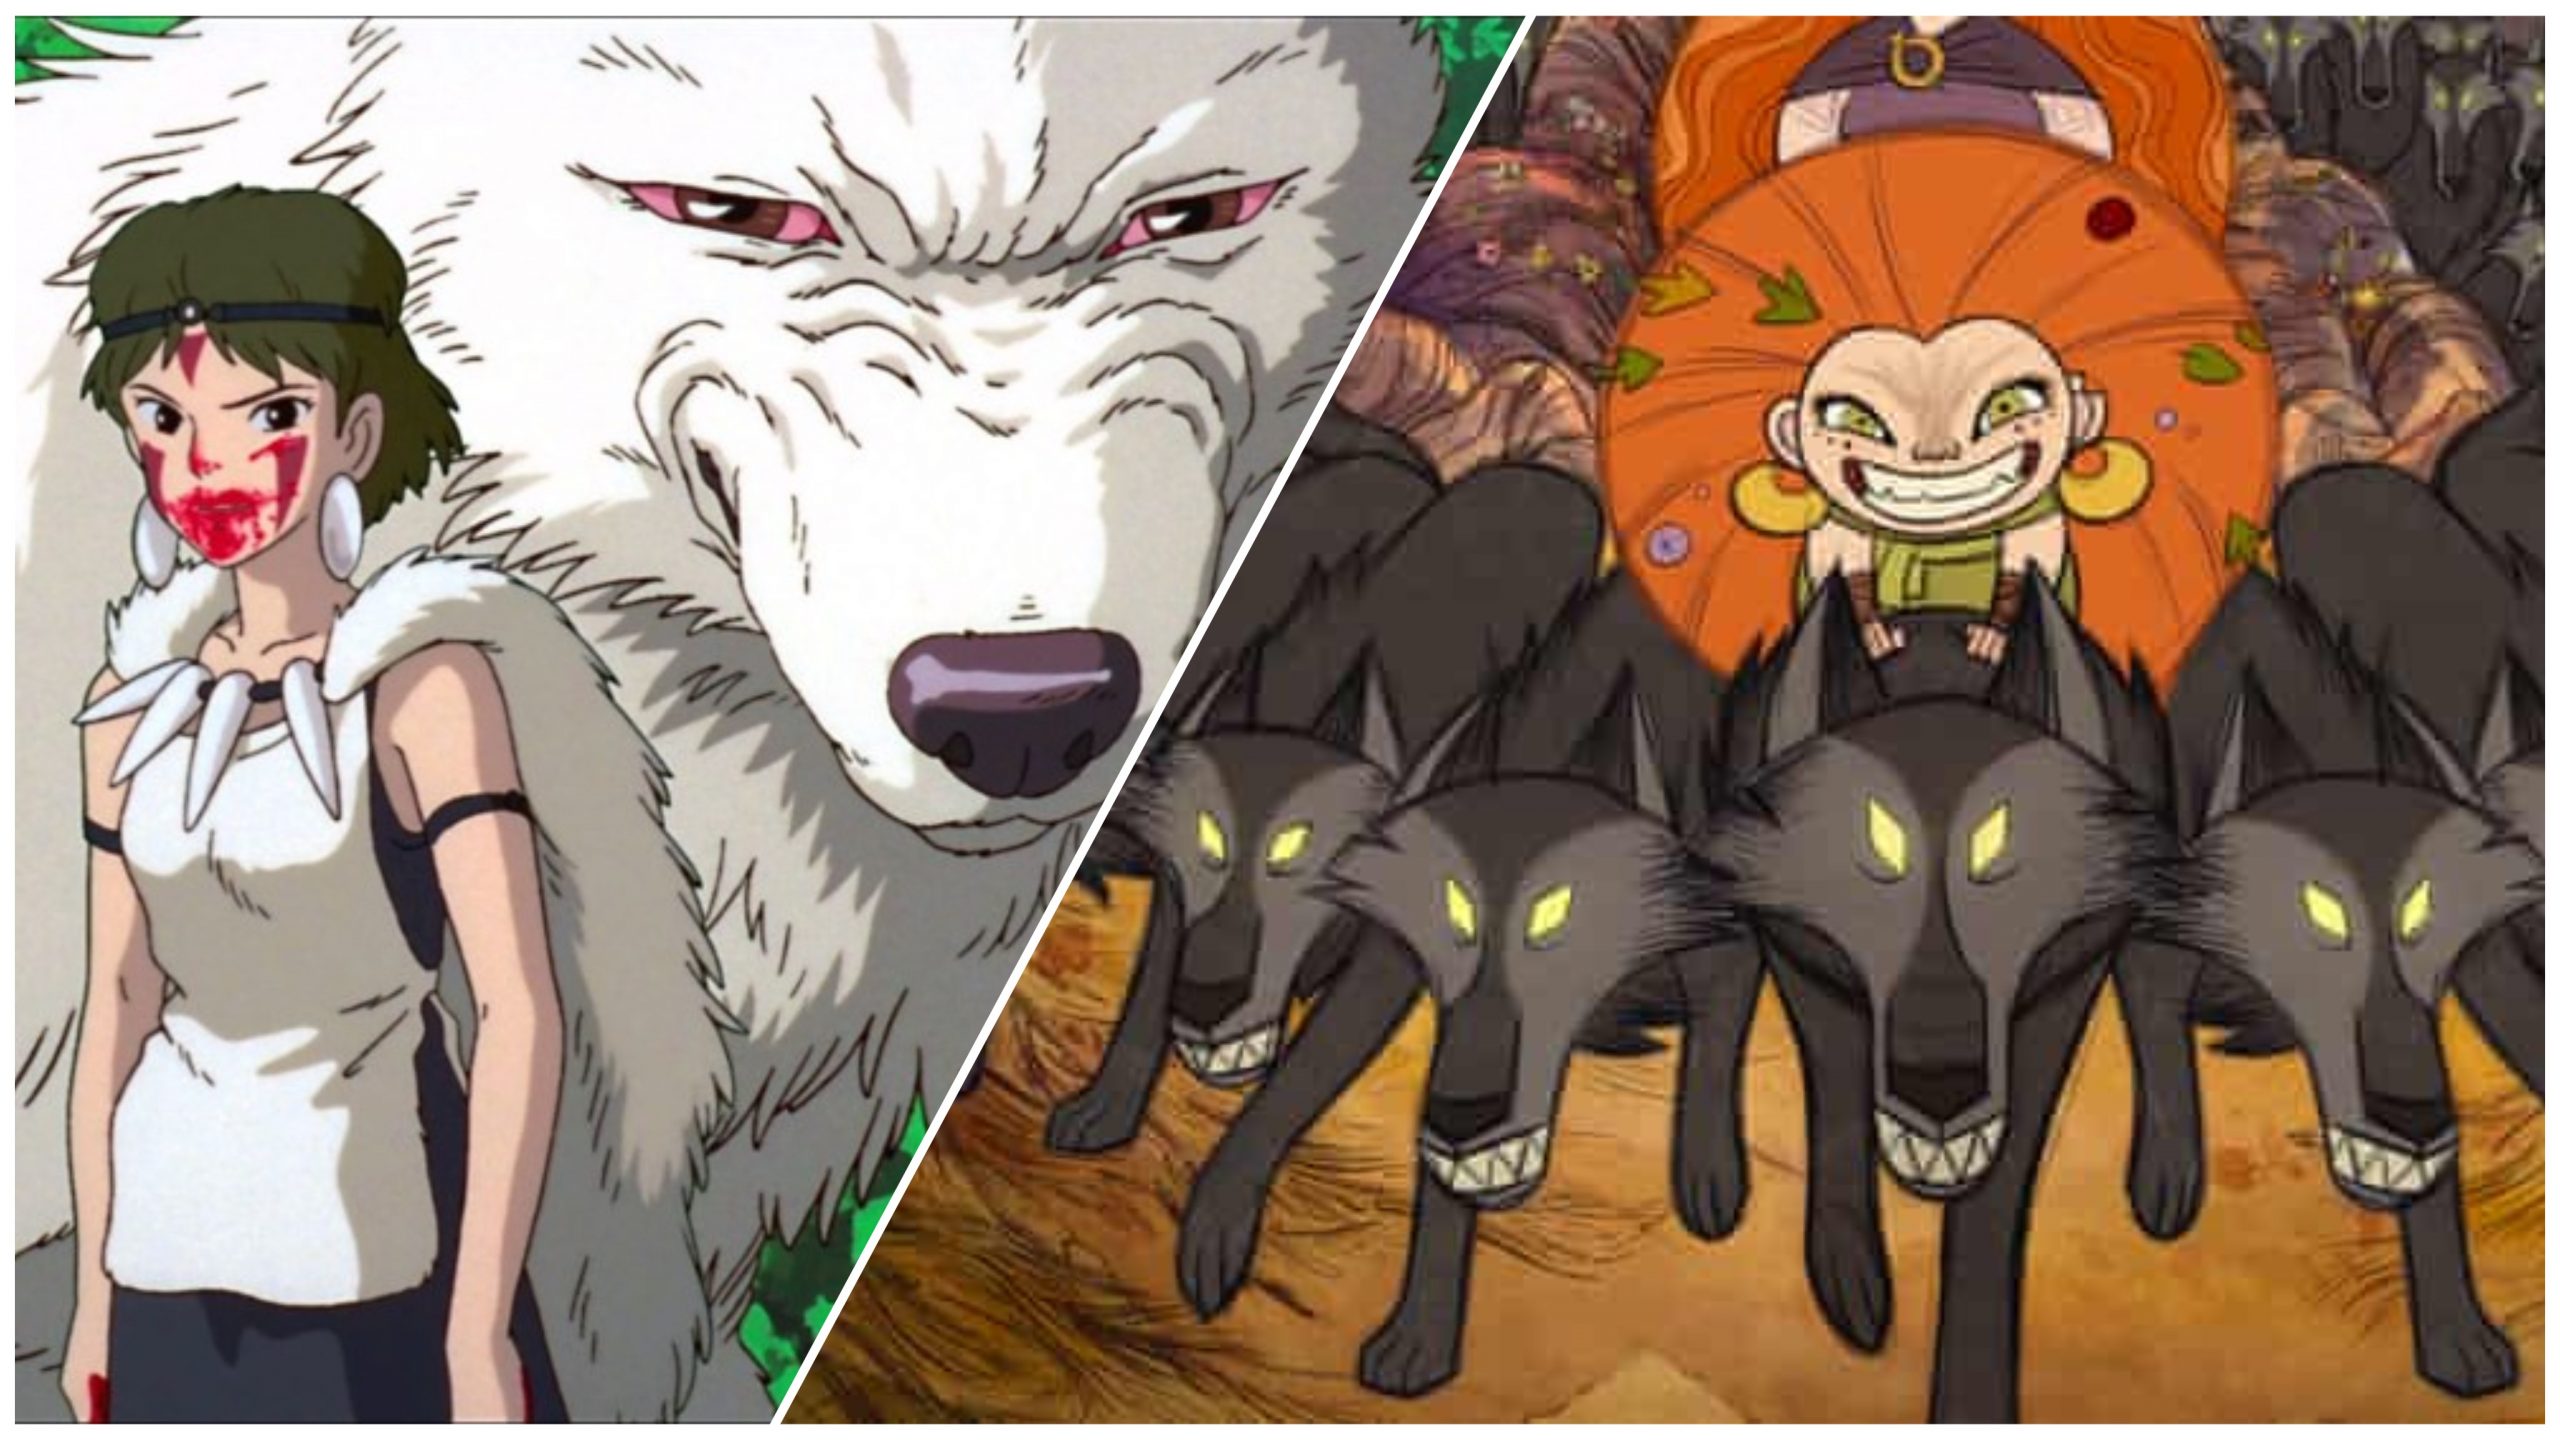 A collage of Studio Ghibli's Princess Mononoke and Wolfalkers directed by Tomm Moore and Ross Stewart.